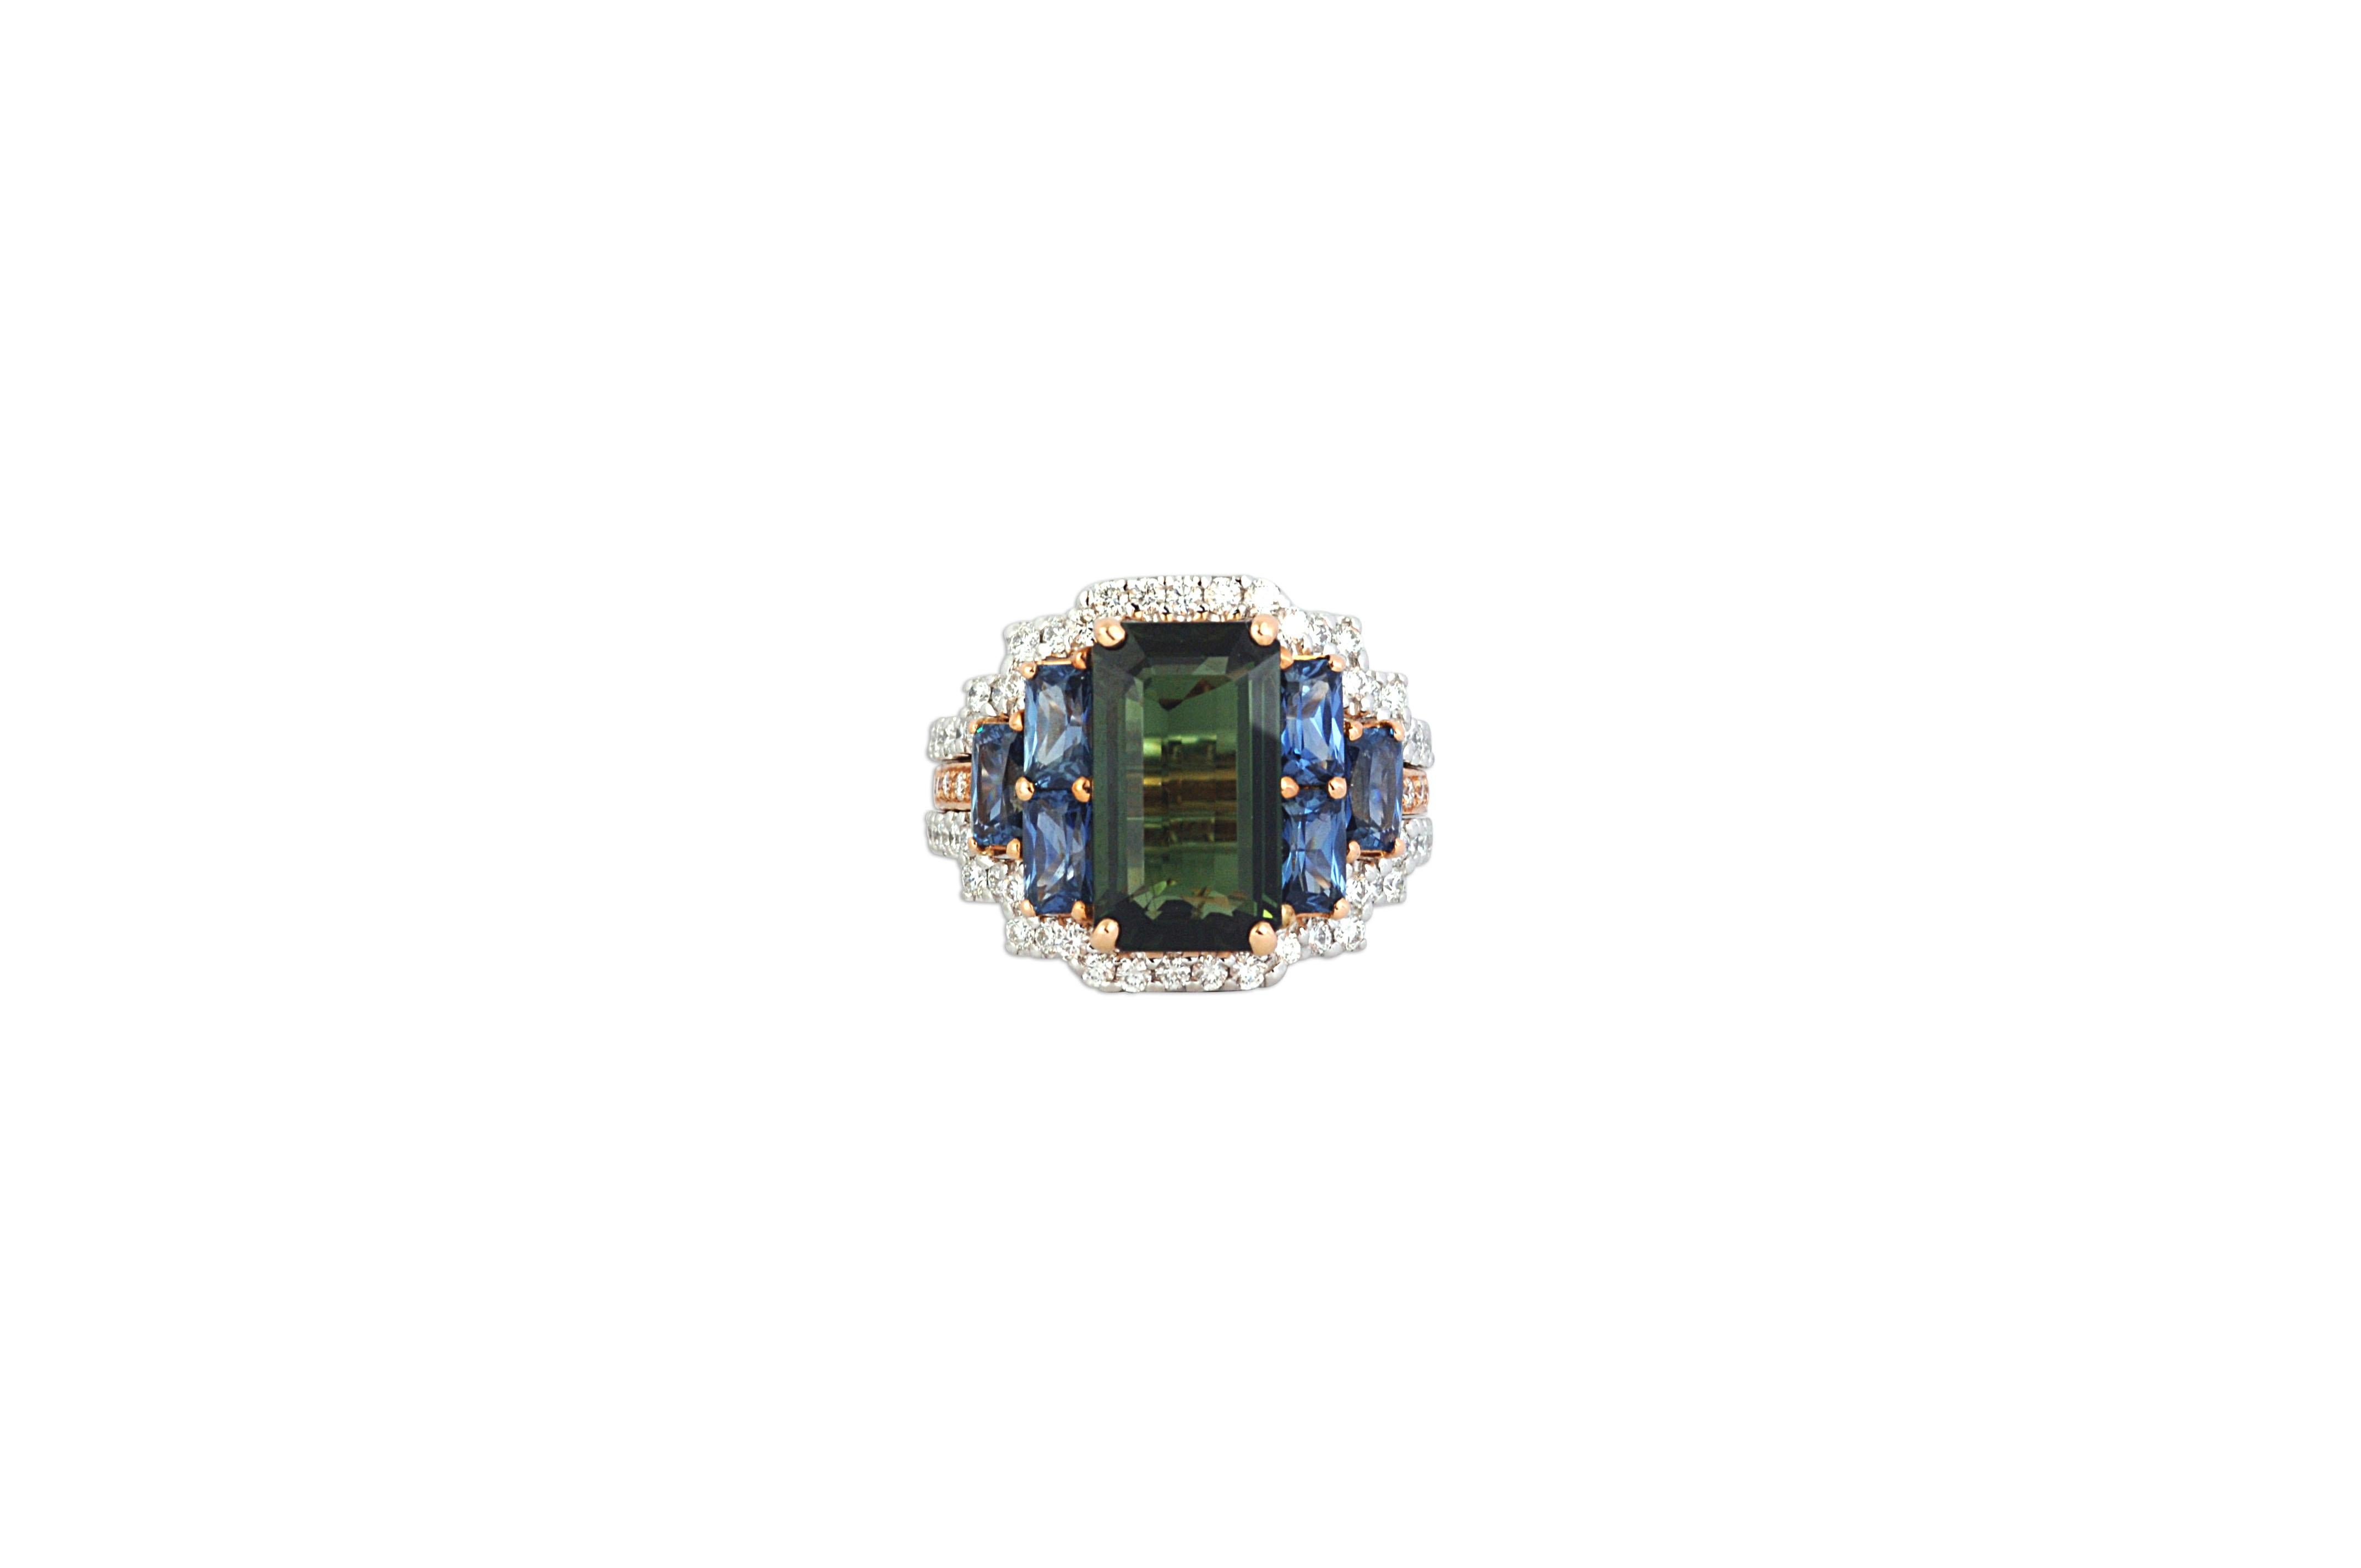 Green Sapphire 5.72 carats, Blue Sapphire 2.30 carats with Diamond 0.74 carat Ring set in 18 Karat White Gold and Pink Gold Settings
Width: 2.5 cm
Length:1.6 cm
Ring Size: 53
Total Weight: 12.38 grams

